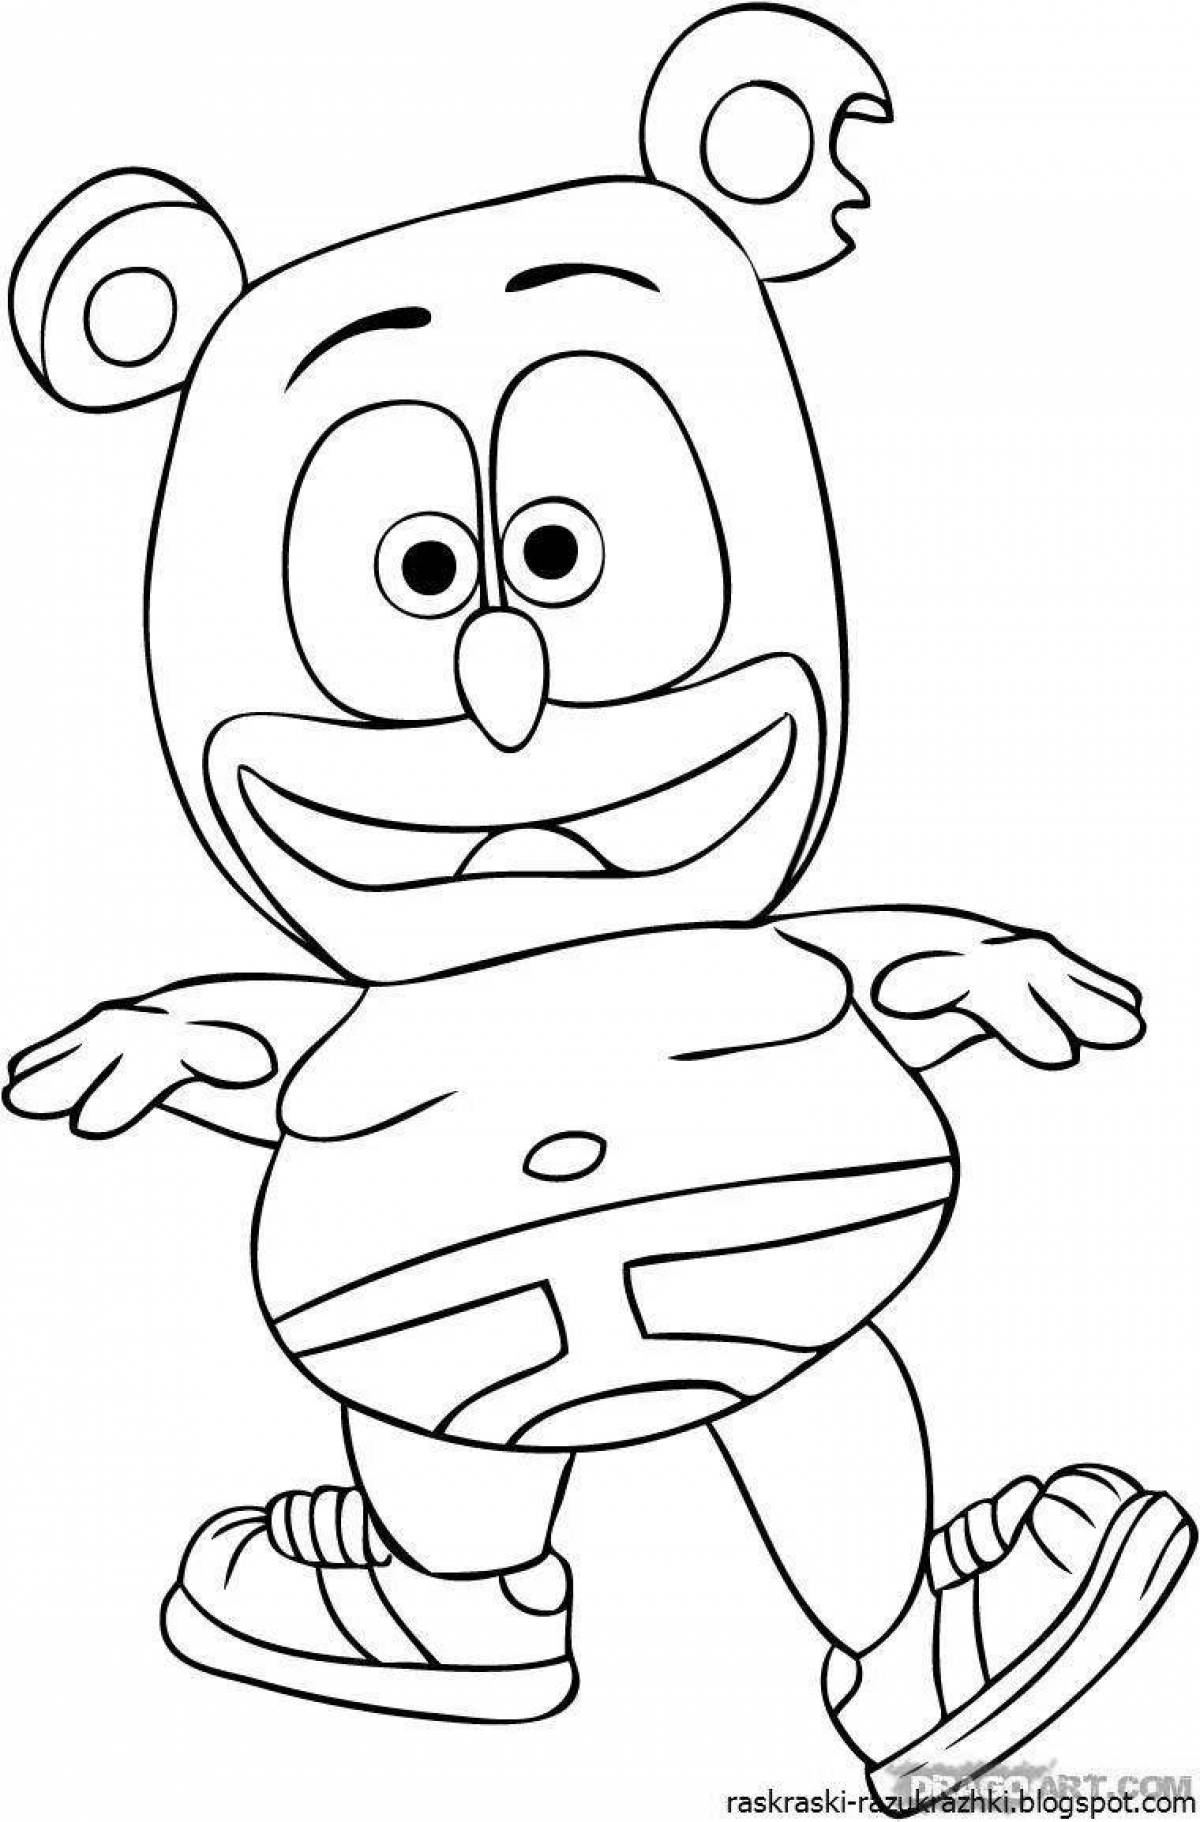 Humber the amazing bear coloring page